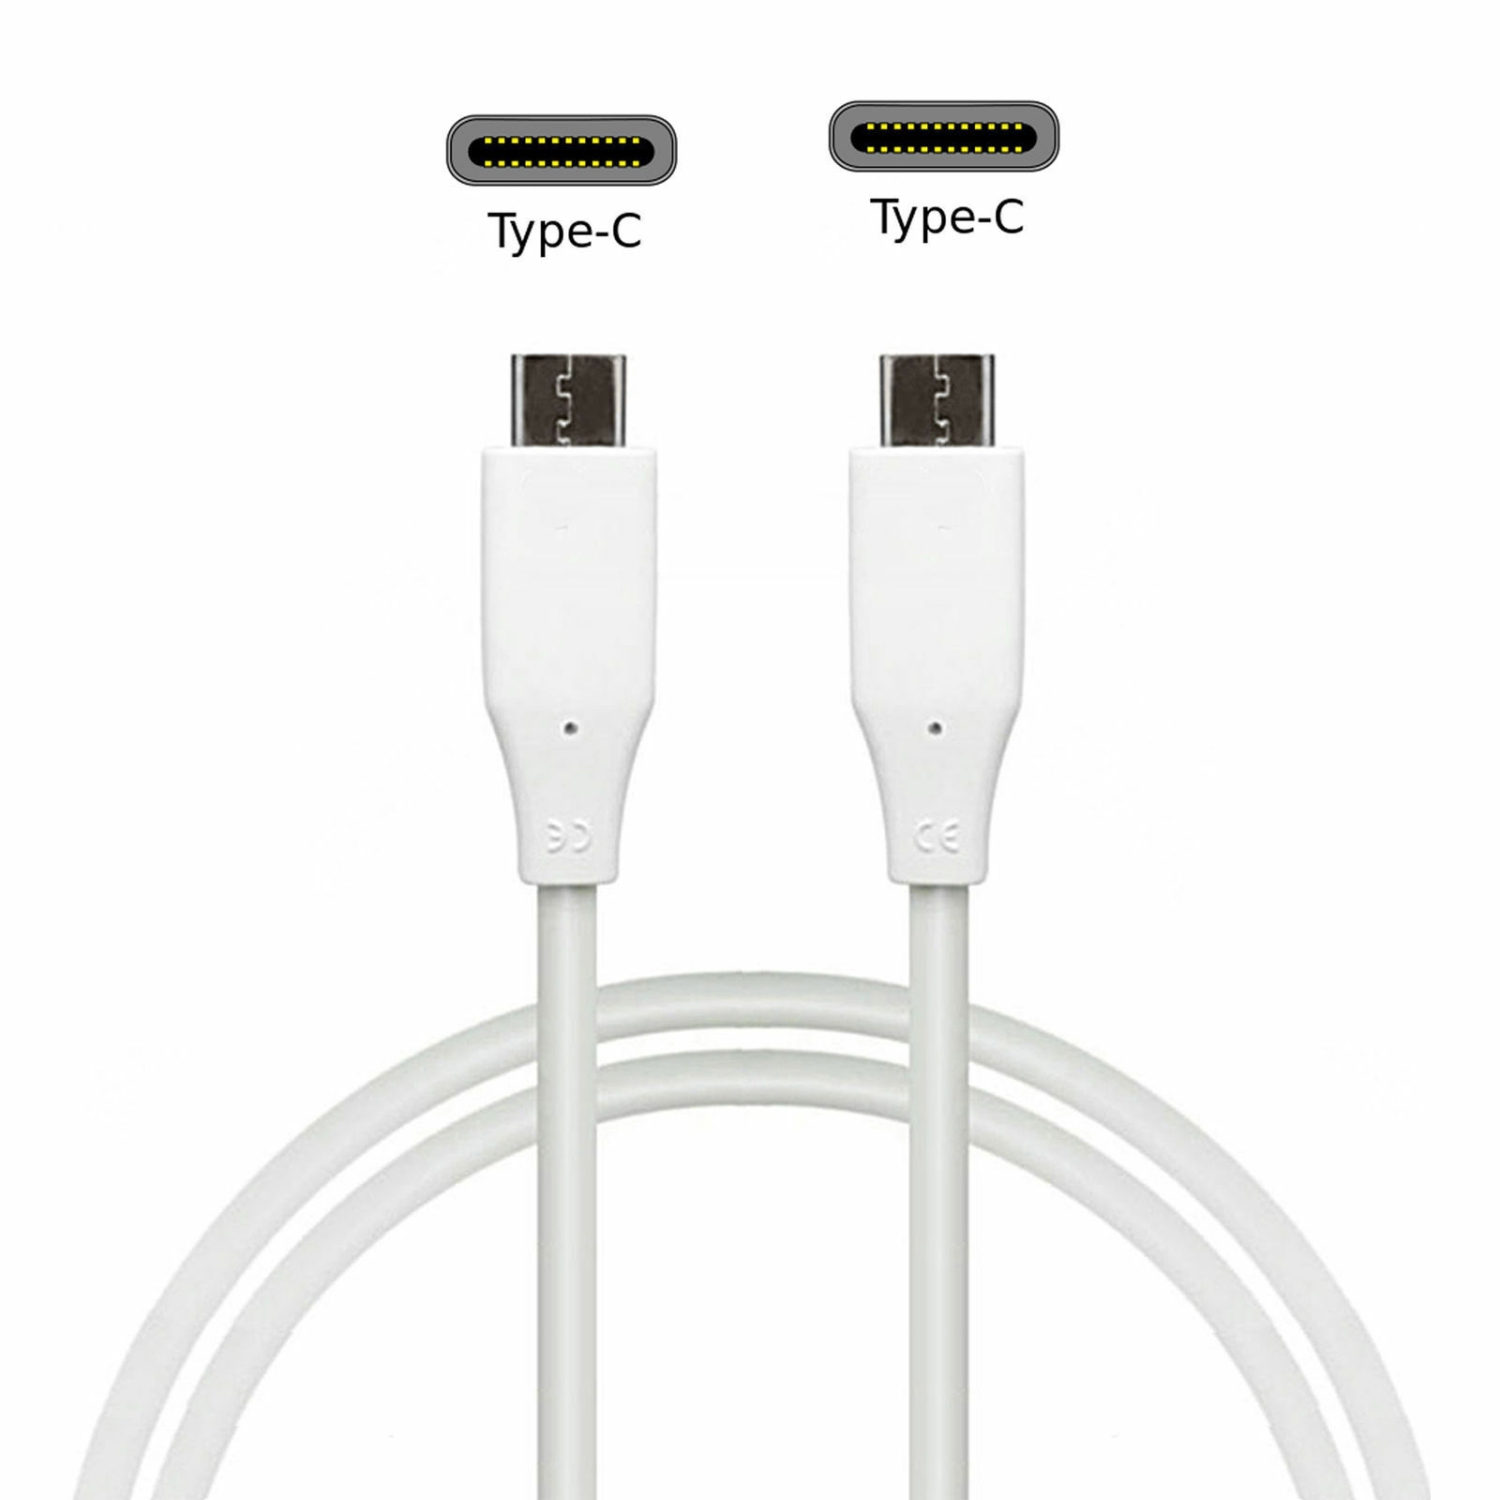 LG 3.3Ft/1M USB 3.0A Type C to Type C Fast Charging Data Cable for LG G6 G7 V20 V30/Google Pixel/Huawei P20 Mate 20, White